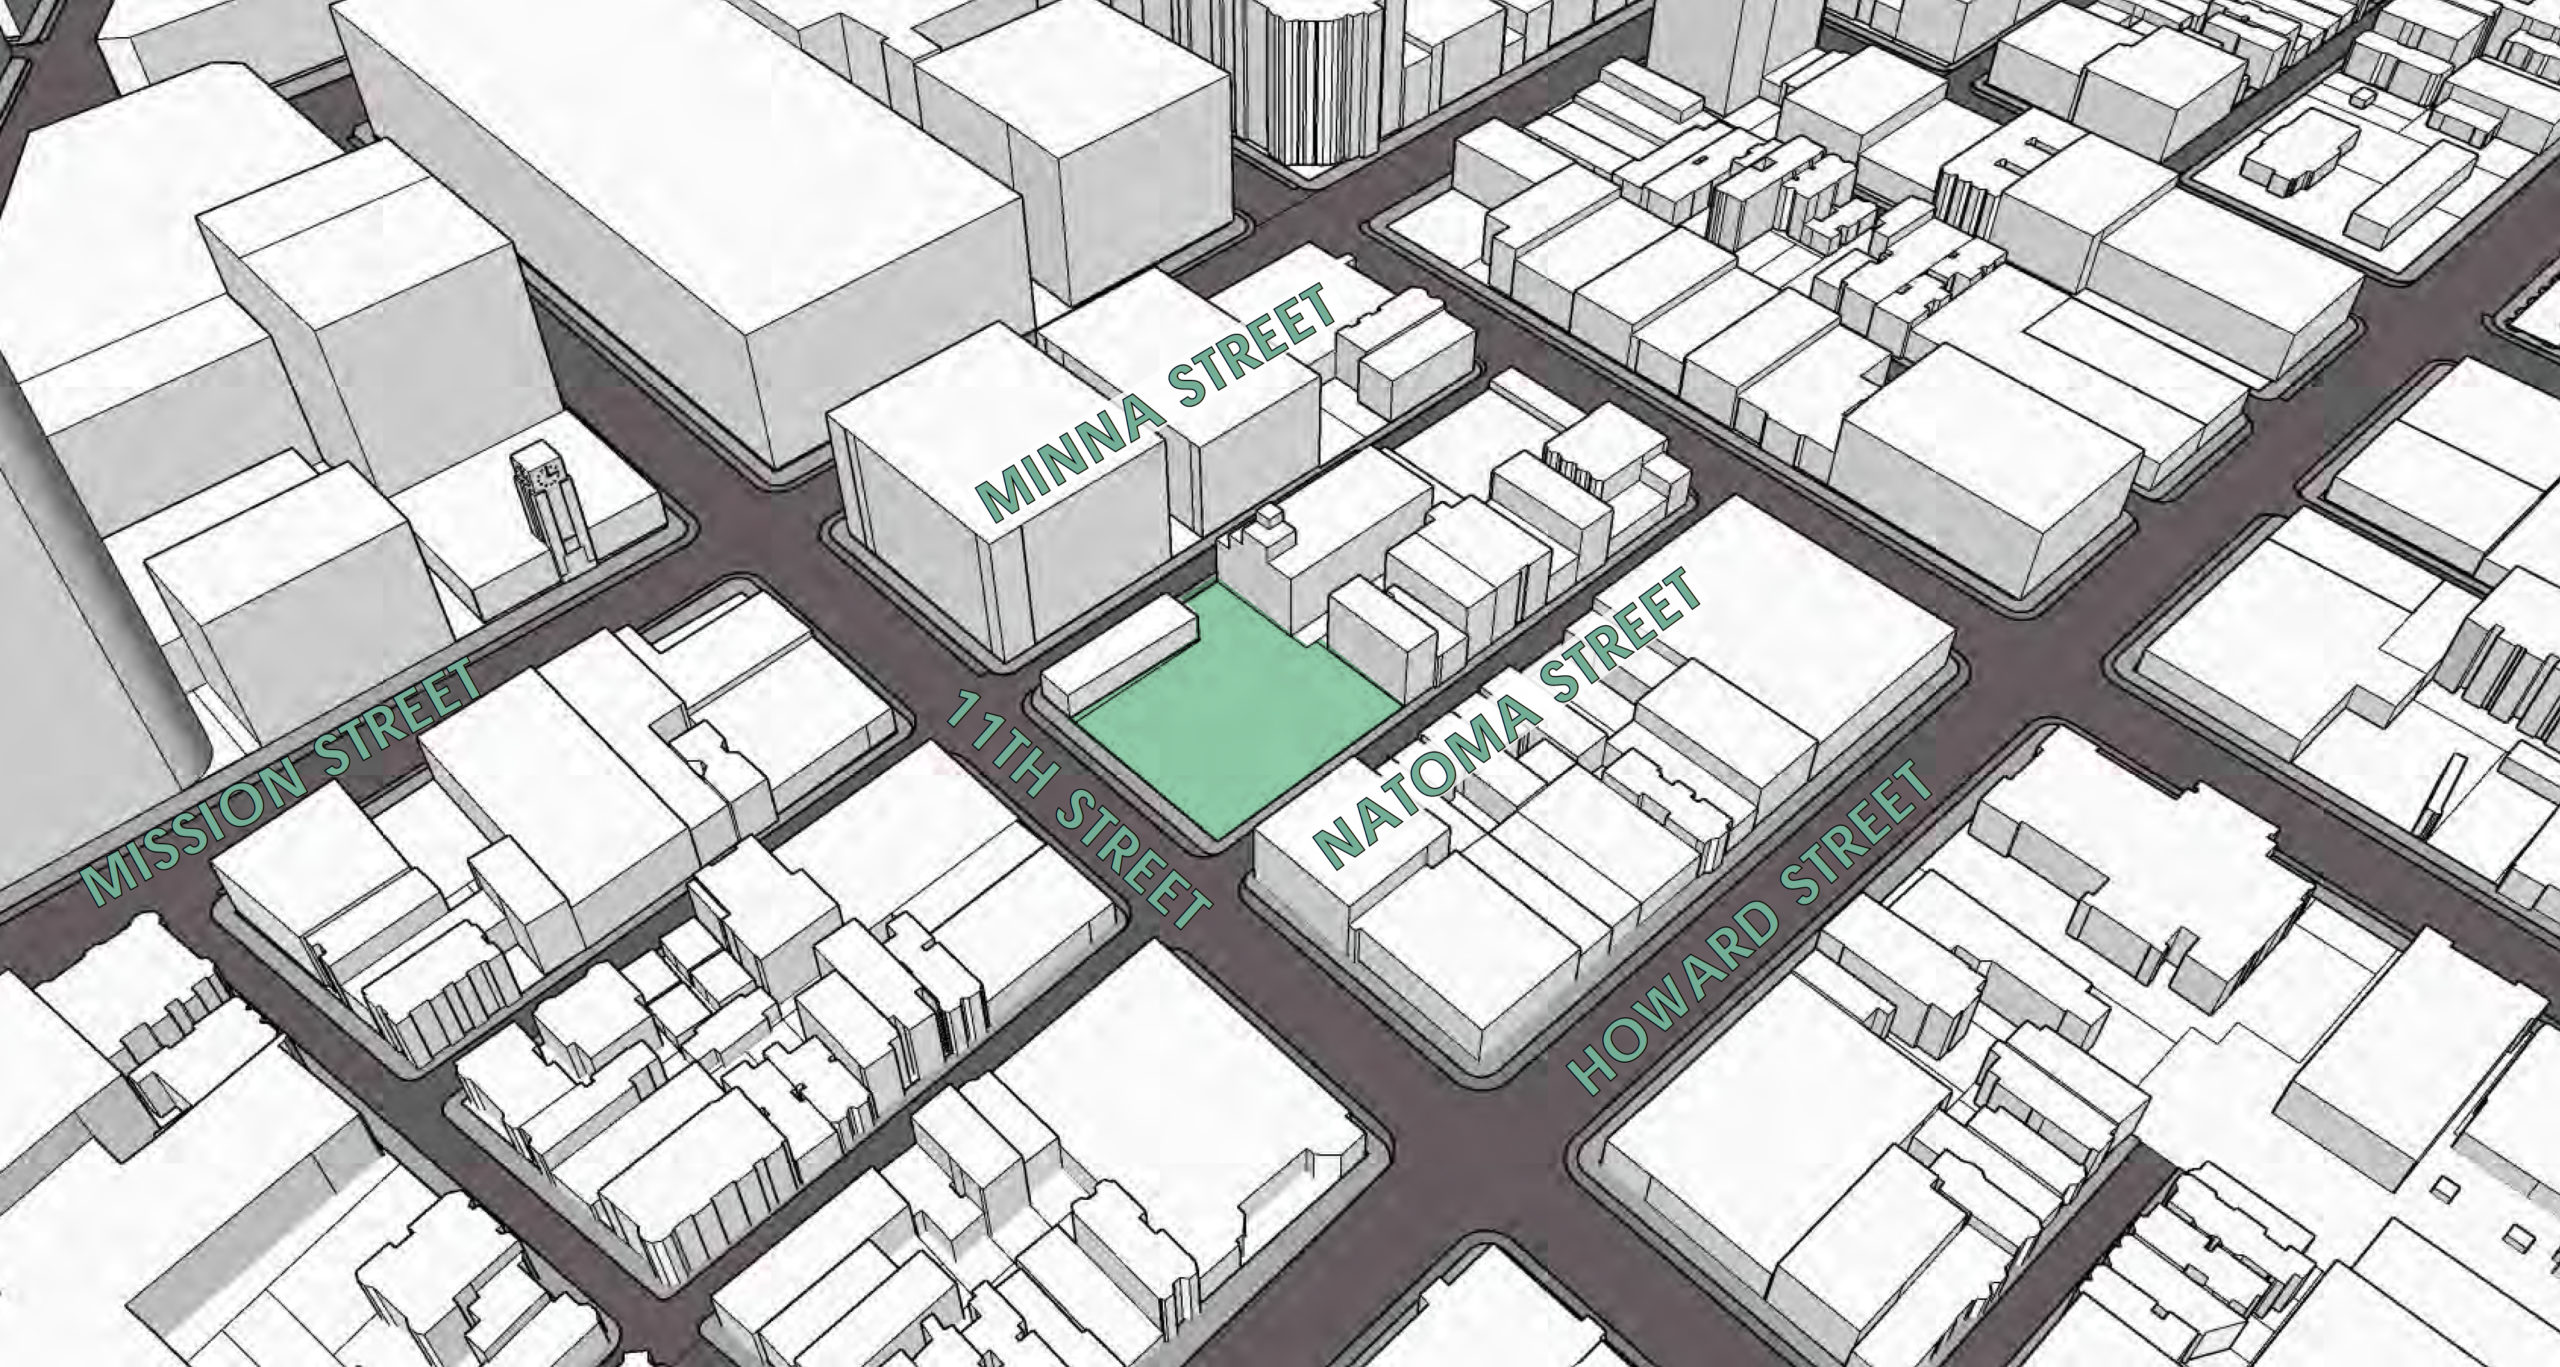 11th and Natoma Street Park site in area context, image via SF Public Works